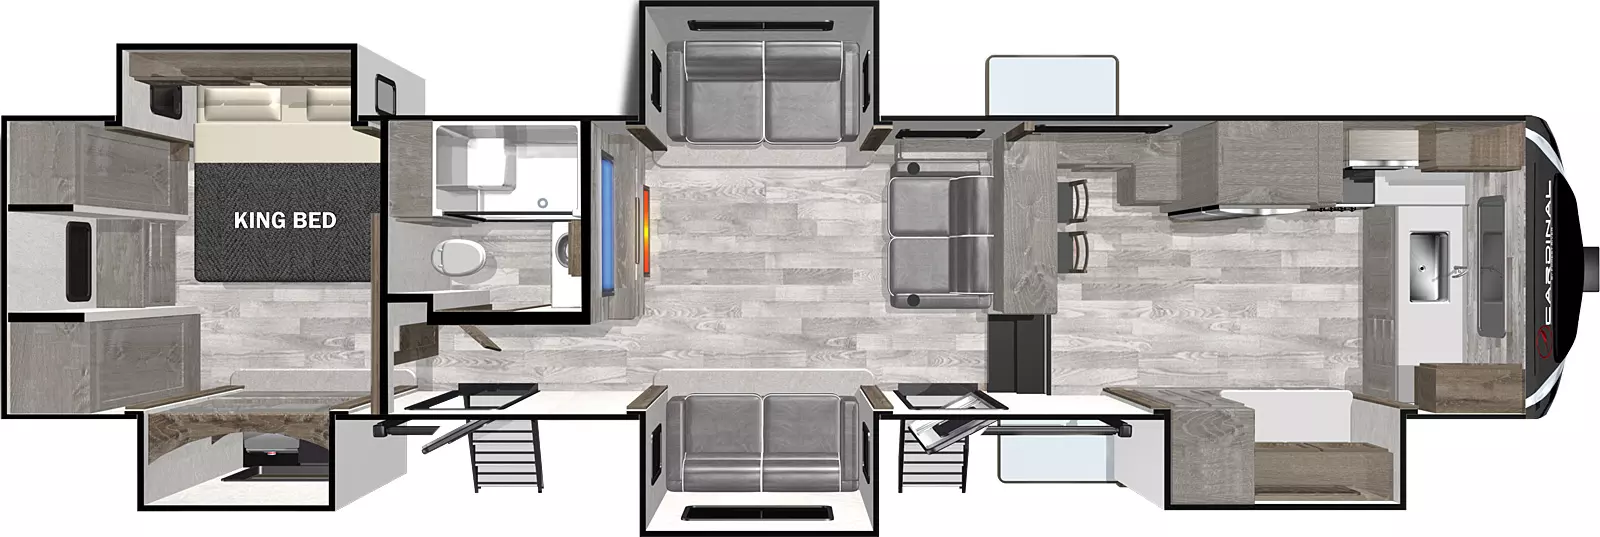 The 403FKLE has five slide outs and two entry doors. Interior layout front to back: front kitchen with slideout; two steps down to living room area with opposing slideout with seating and one entry; off-door side full bathroom with second entry on door side; rear bedroom with king bed slideout on off-door side, and slideout on door side.